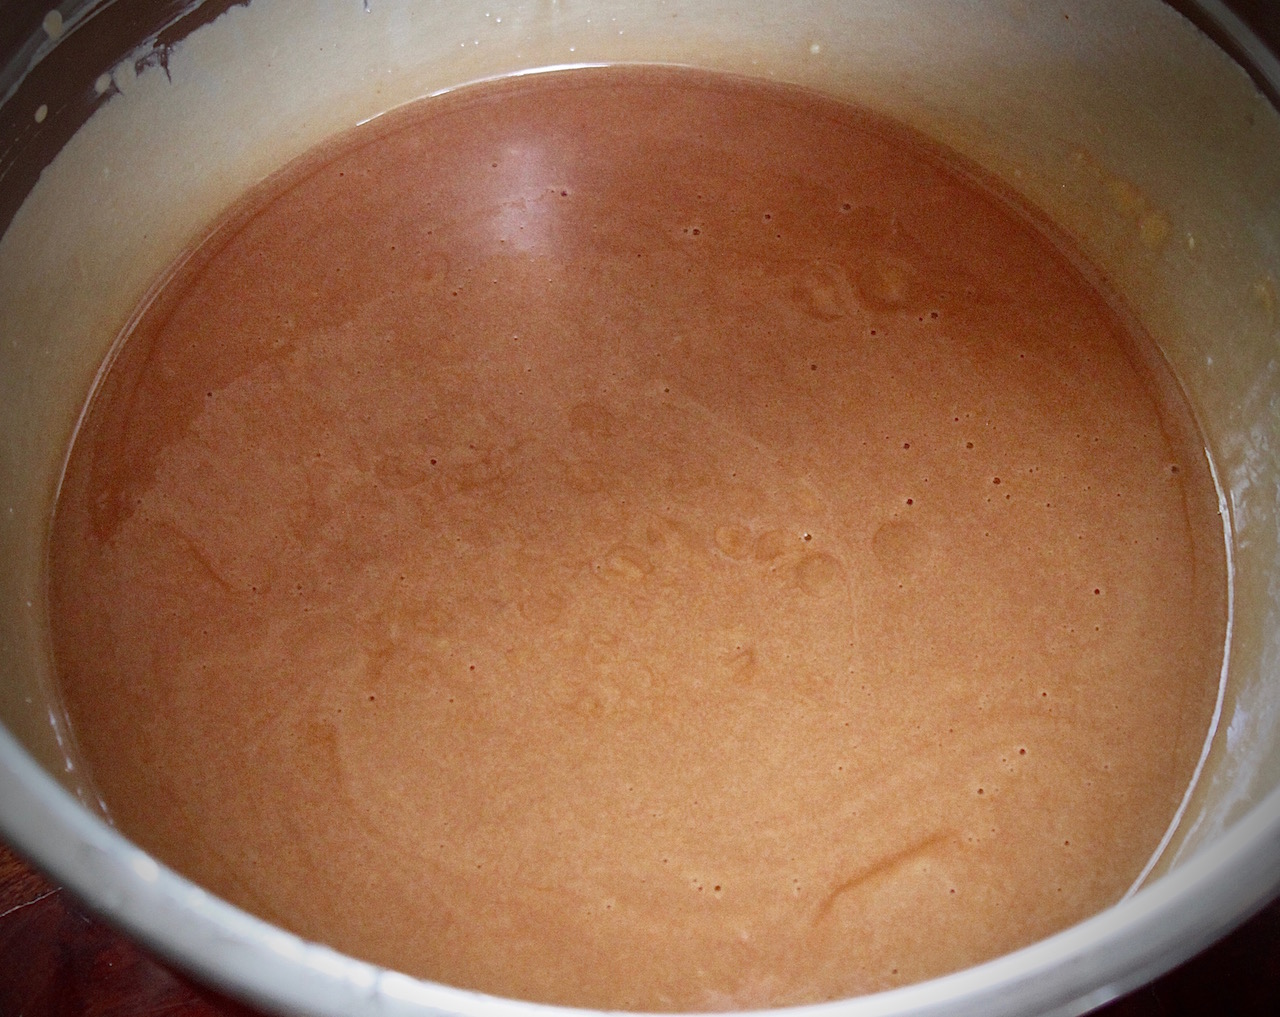 The custard, after the mungomba fruit was added.